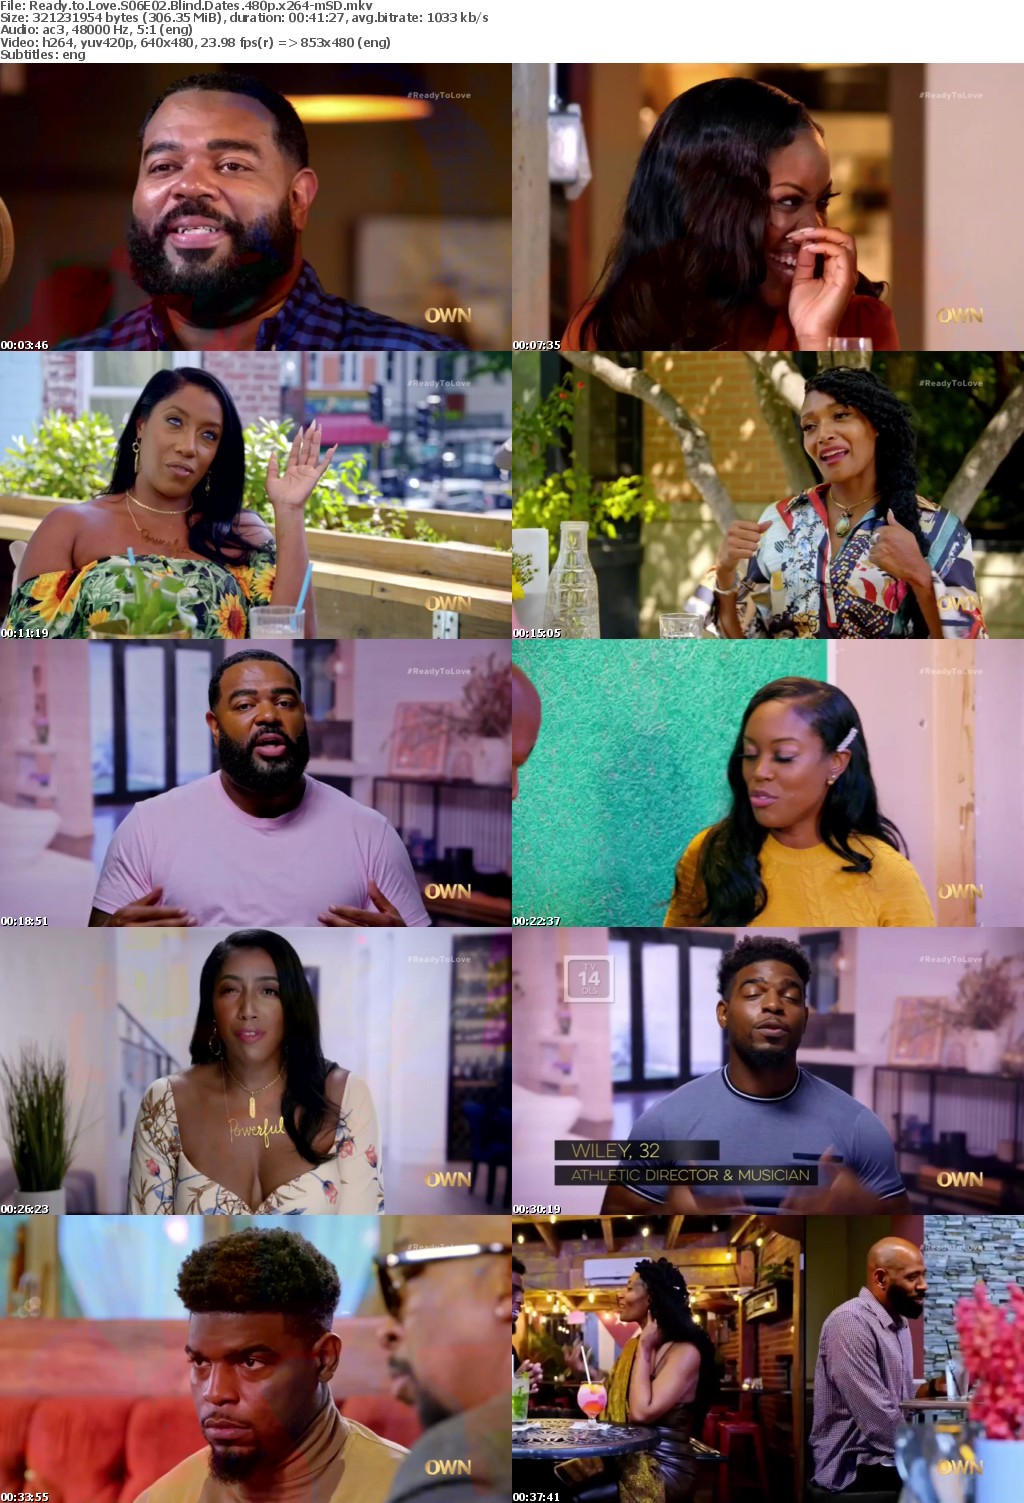 Ready to Love S06E02 Blind Dates 480p x264-mSD